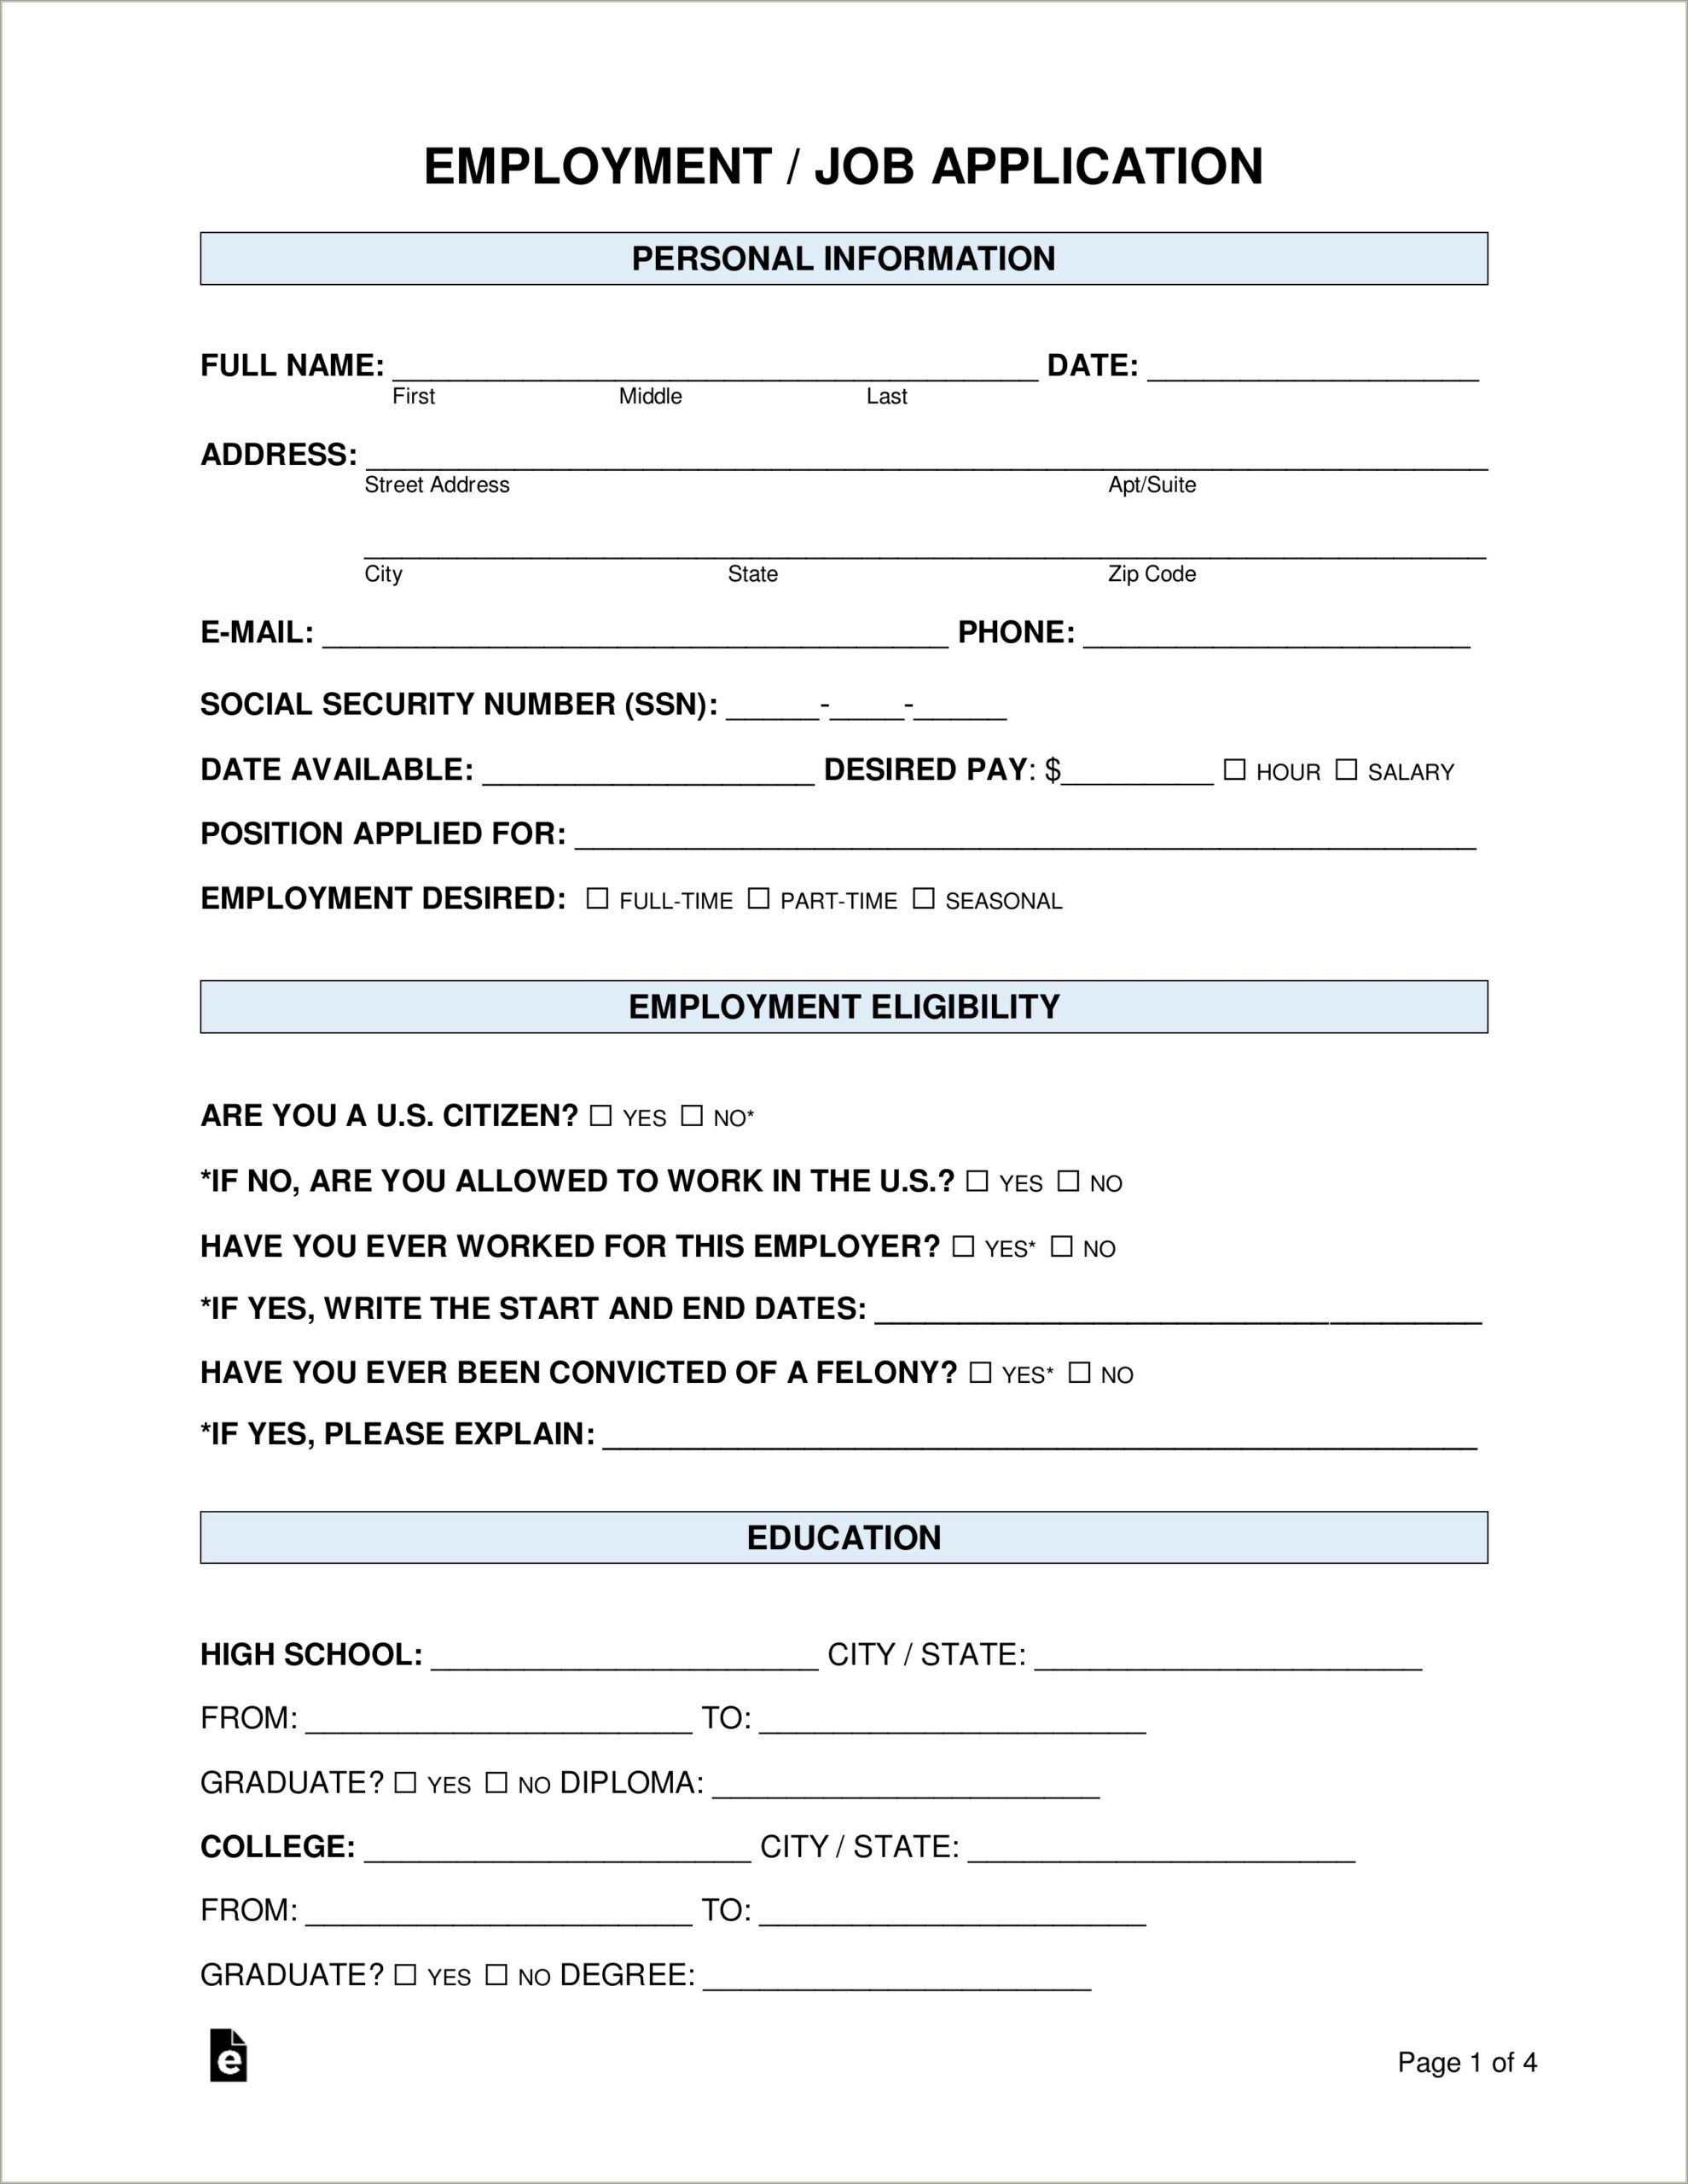 Employment Application Form Template Free Download Resume Example Gallery